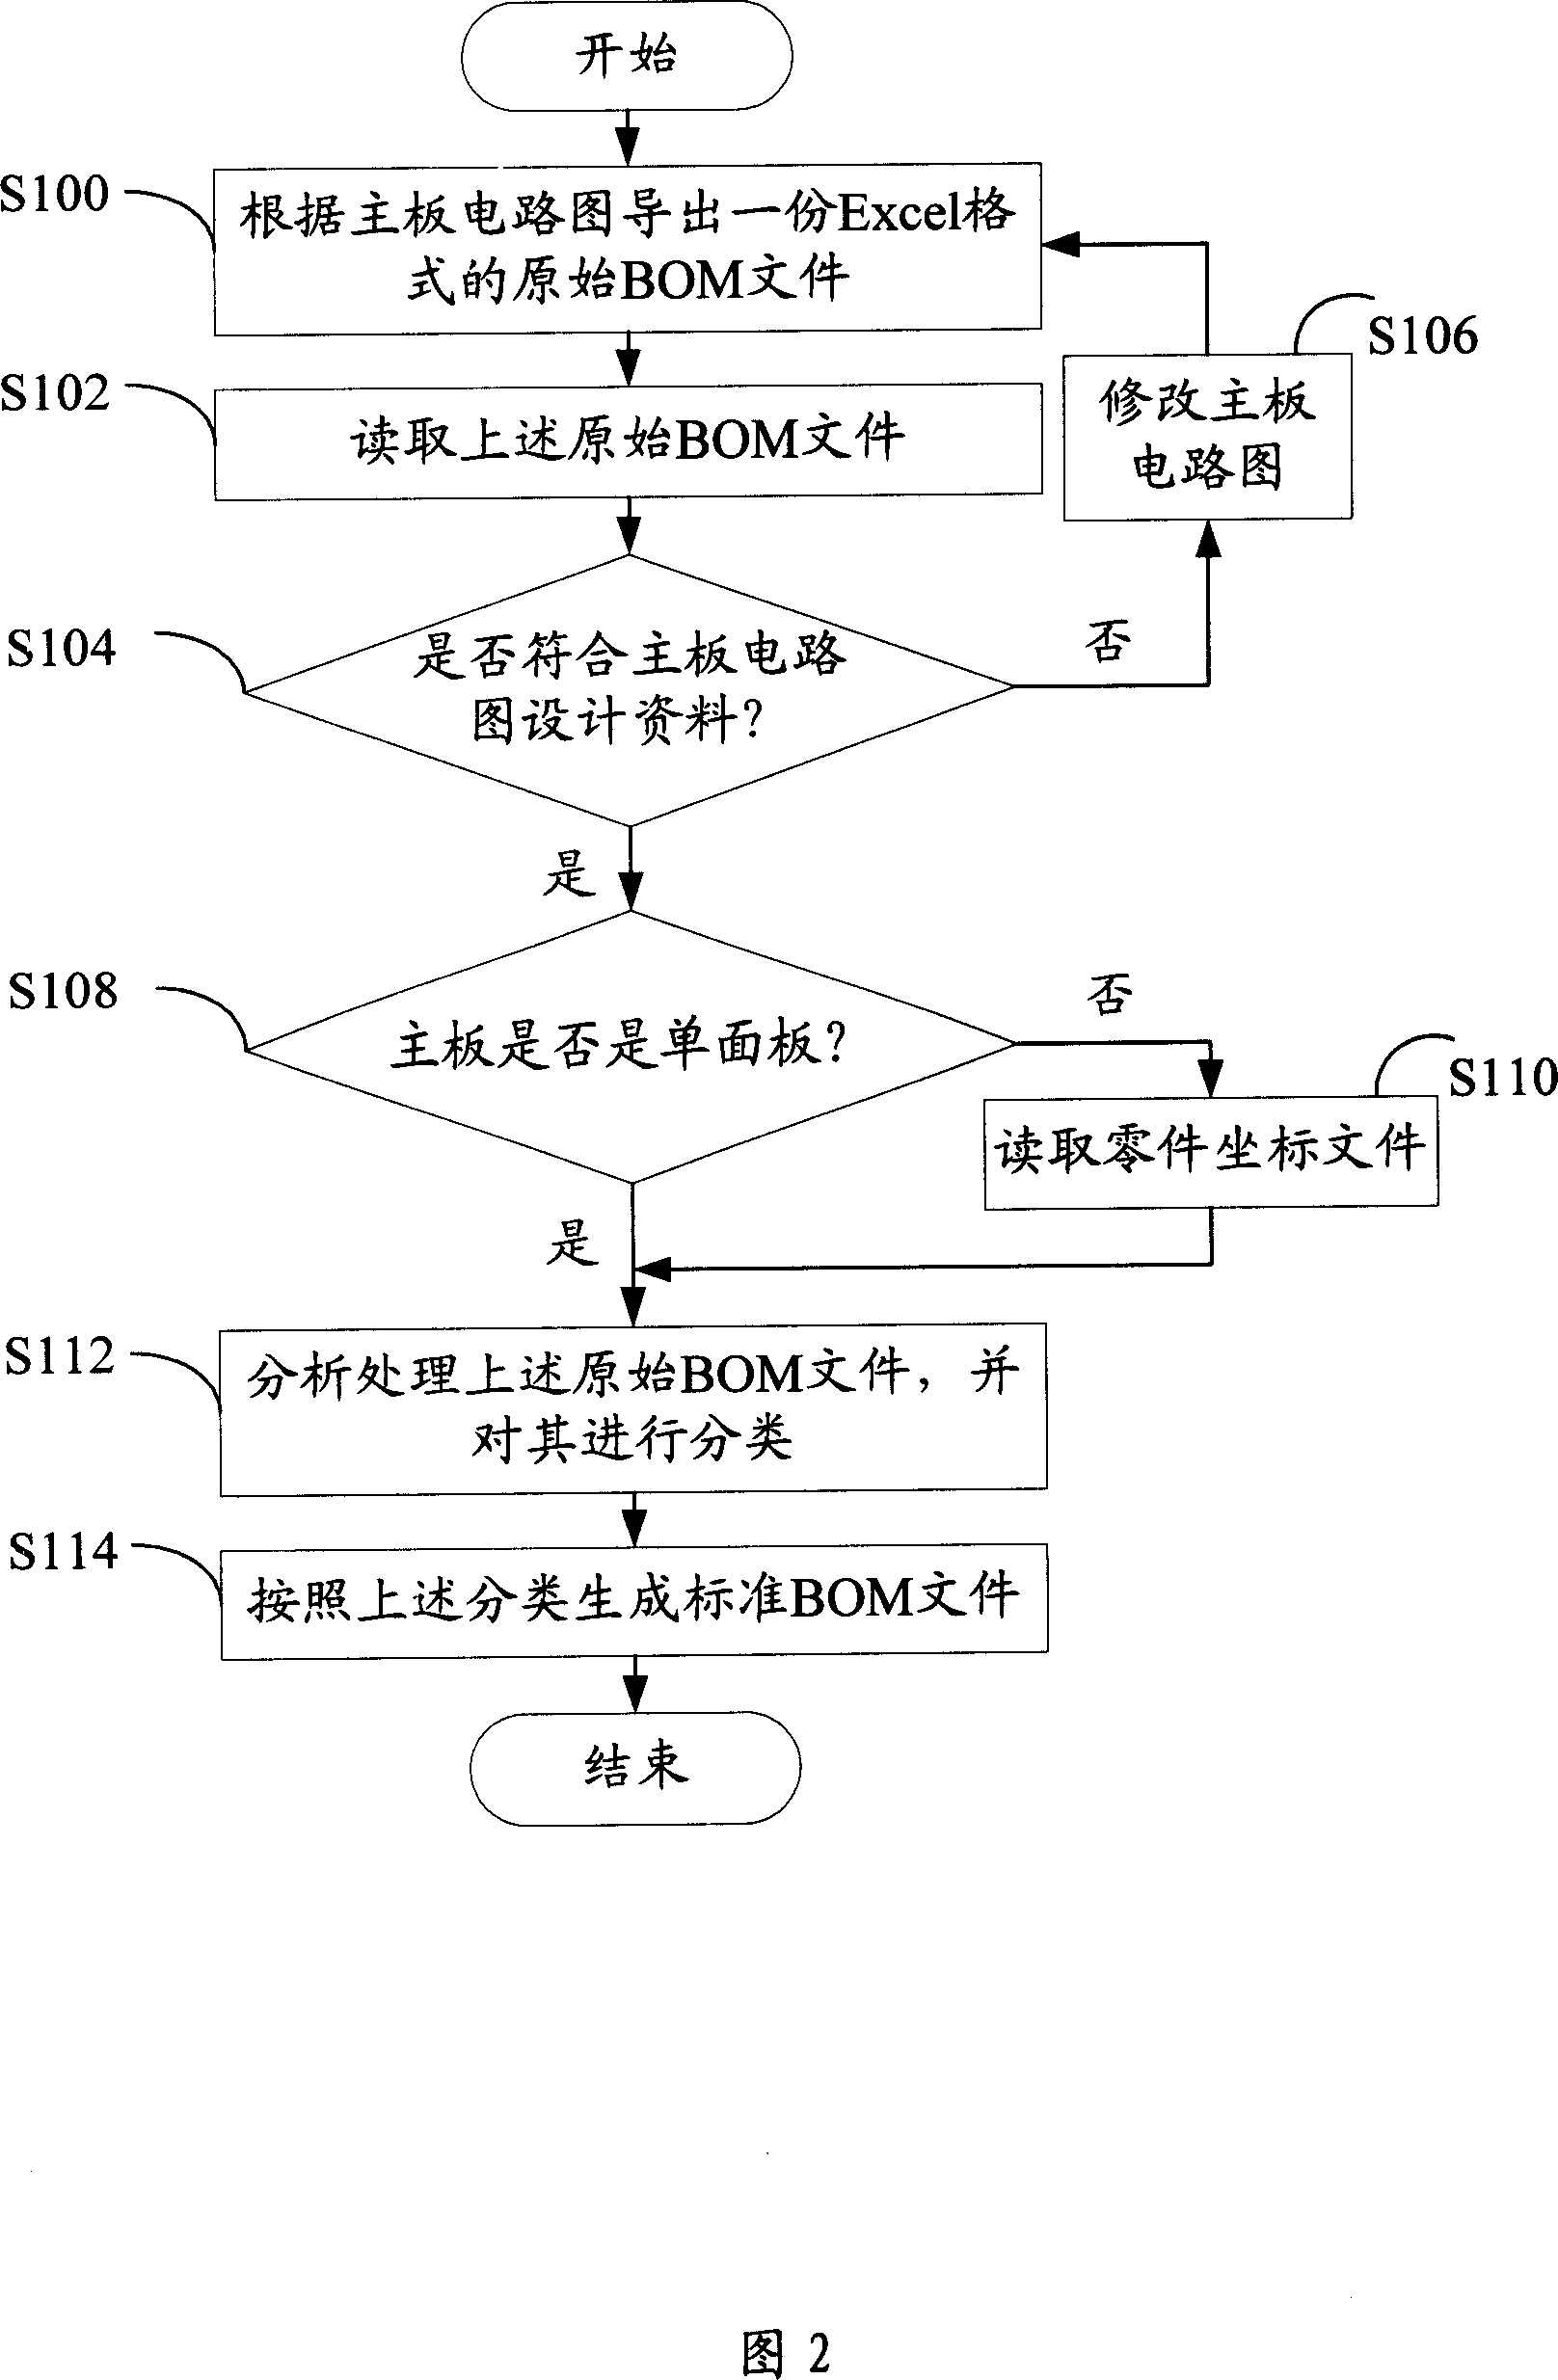 Materials list generation system and method